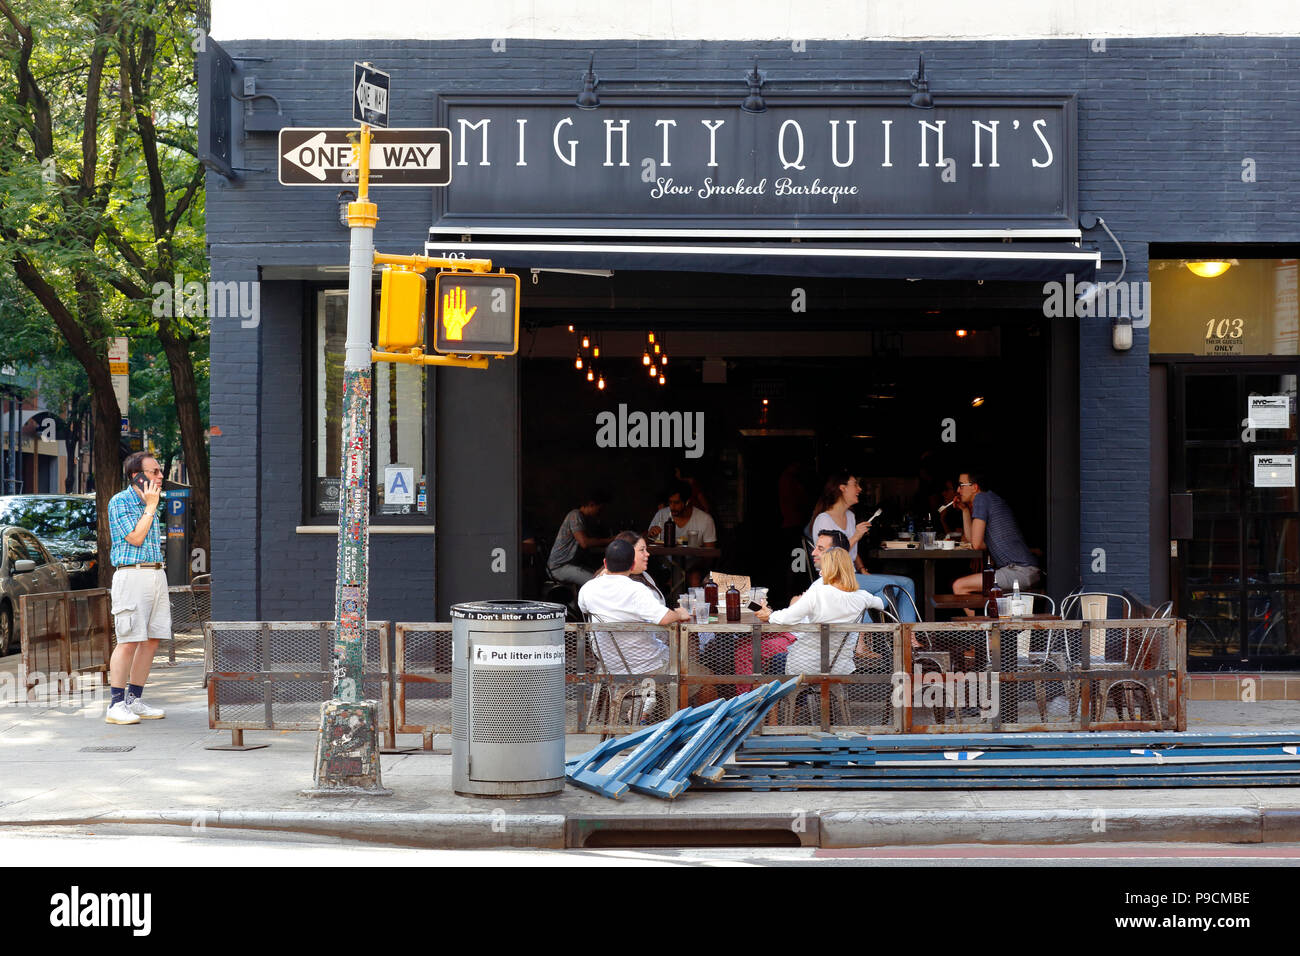 Mighty Quinn's Barbeque, 103 Second Ave, New York, NY. exterior storefront of a BBQ eatery, and sidewalk cafe in the East Village of Manhattan. Stock Photo